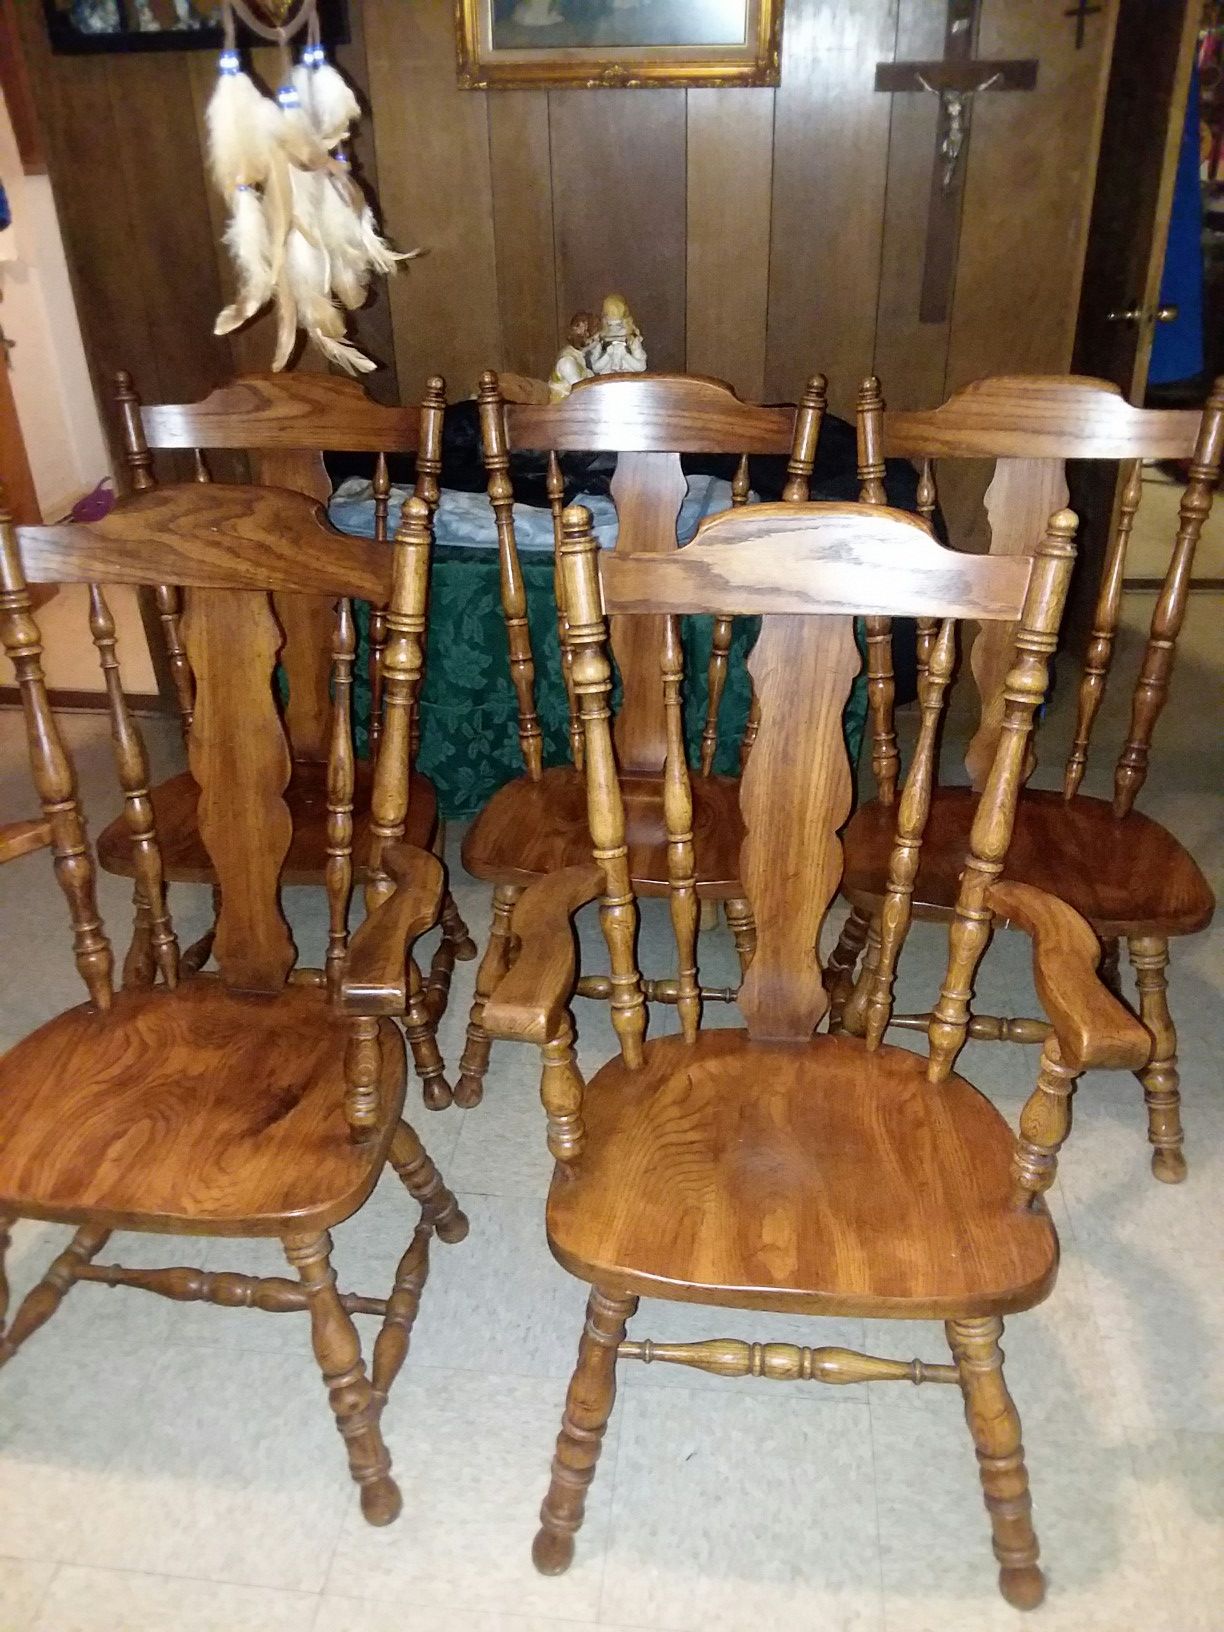 SOLID WOOD $25 EACH / $65 FOR ALL